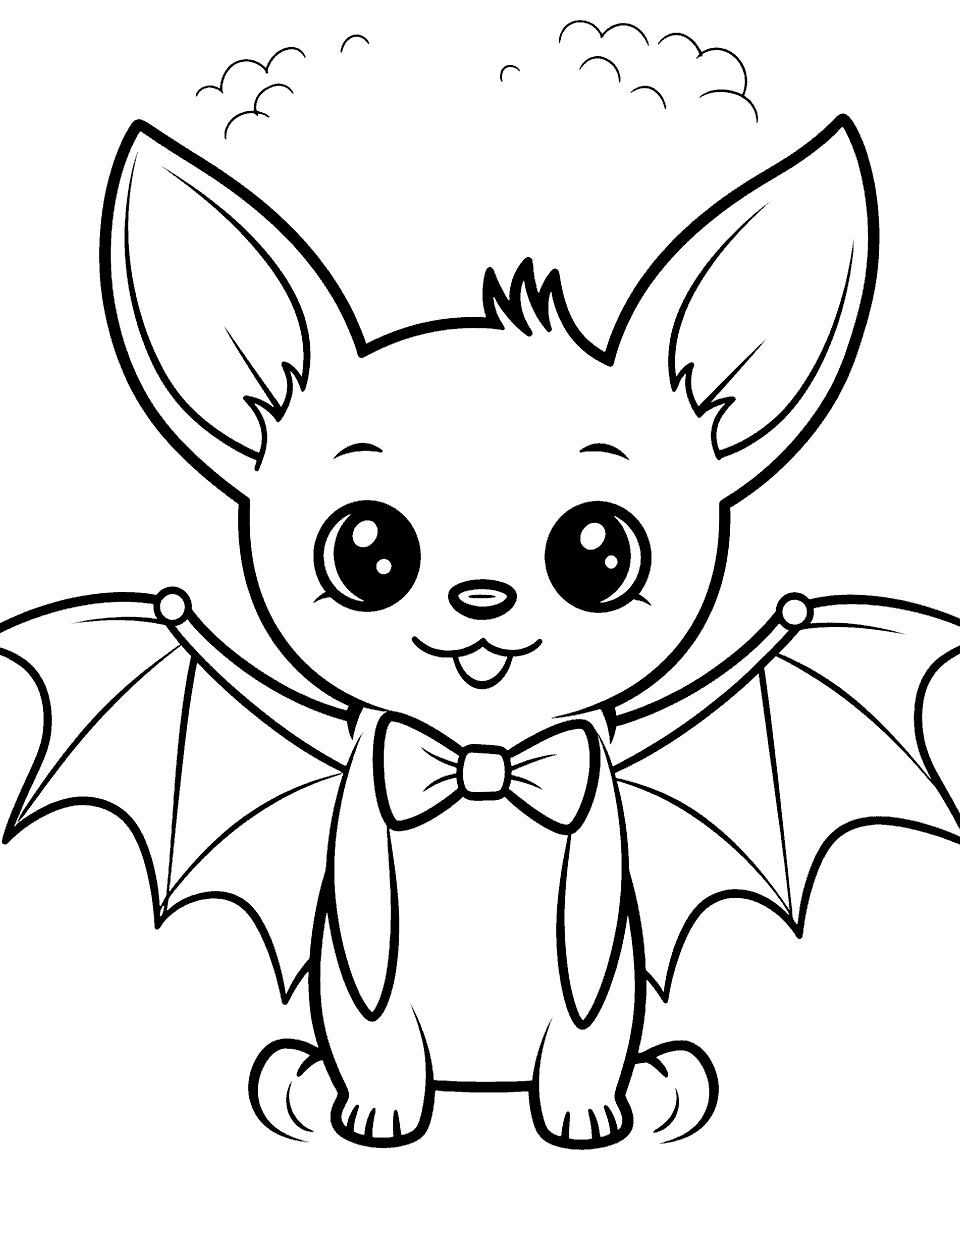 Kawaii Bat with a Bow Coloring Page - A super cute bat with large eyes and a bow on its neck.